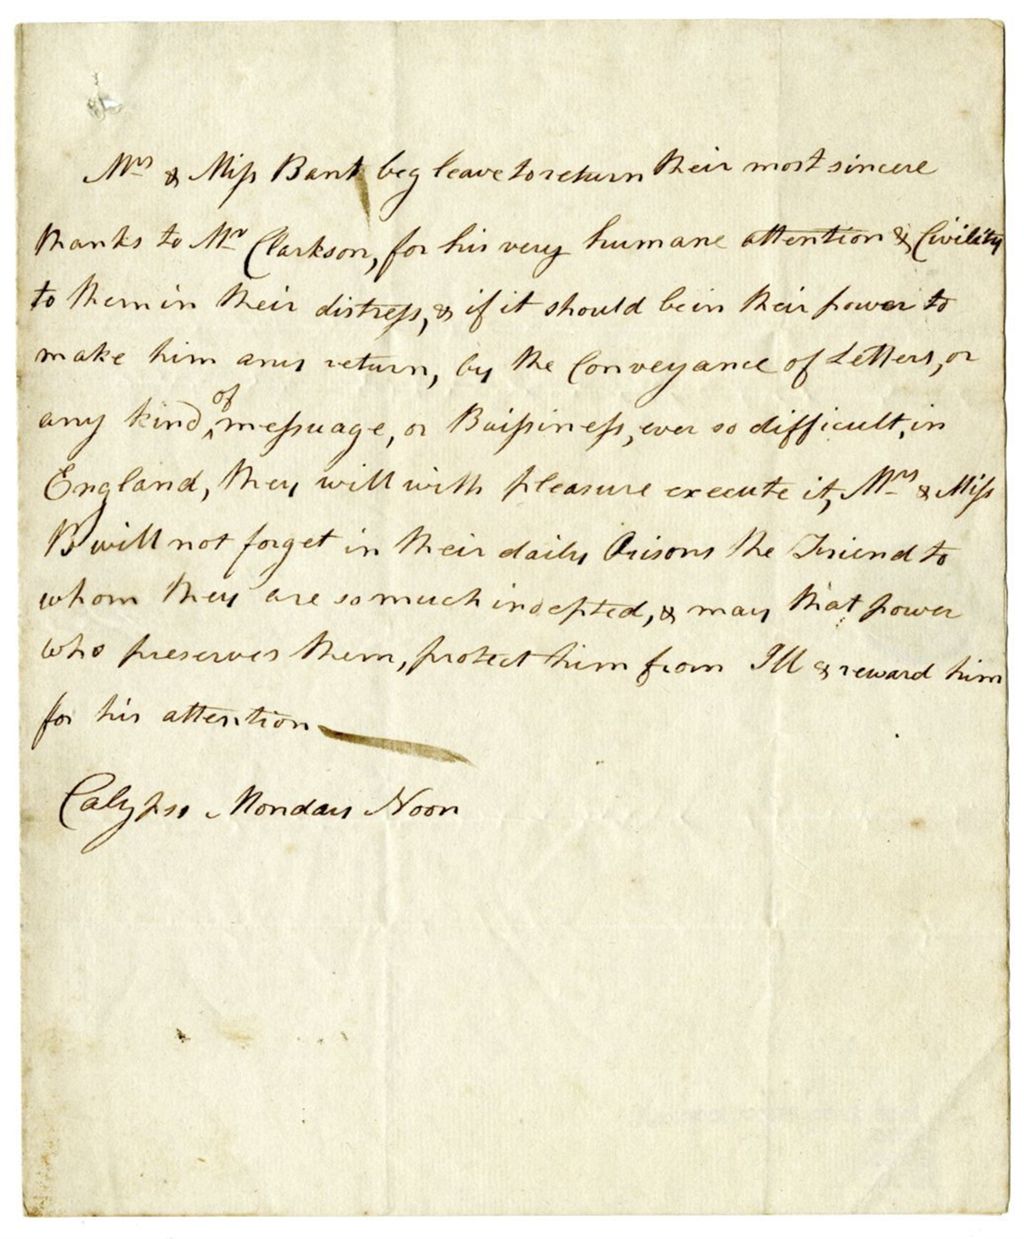 Letter from Calypso Monday Noon (?) to John Clarkson